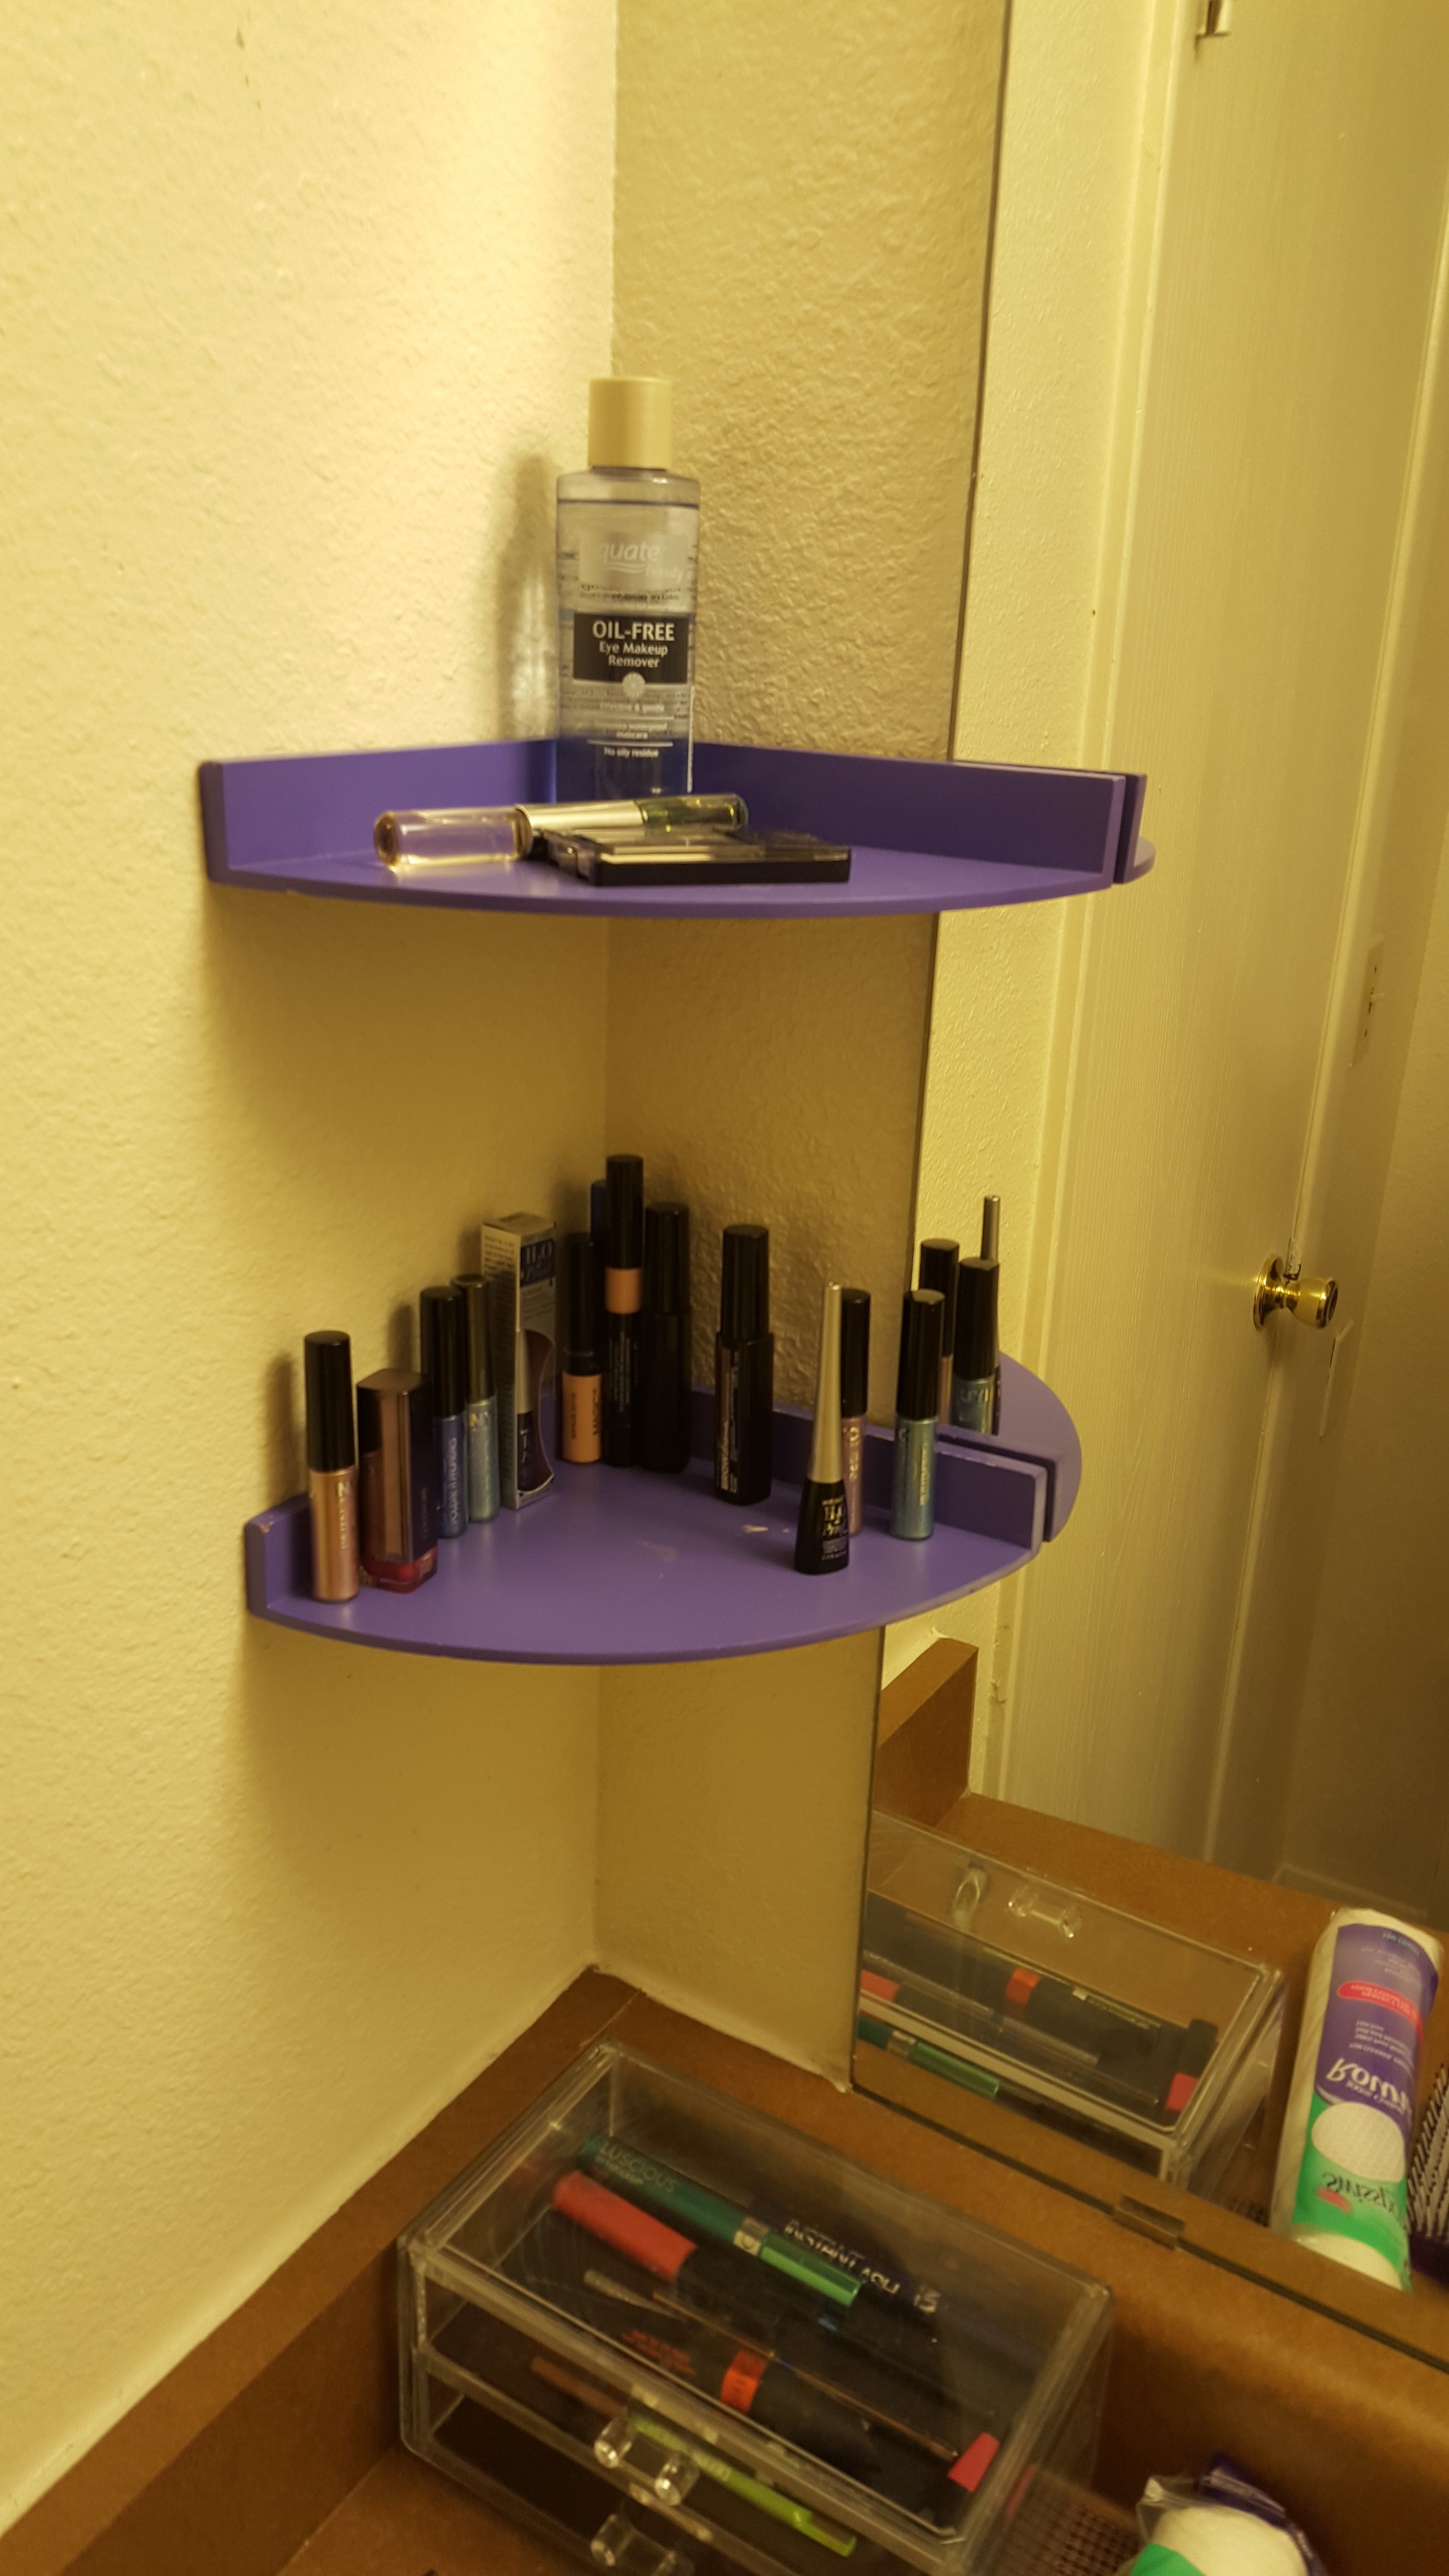 using command strips these shelves their job holding some floating girls most prized procession makeup bookshelf simple design small bathroom vanity ideas narrow kitchen island